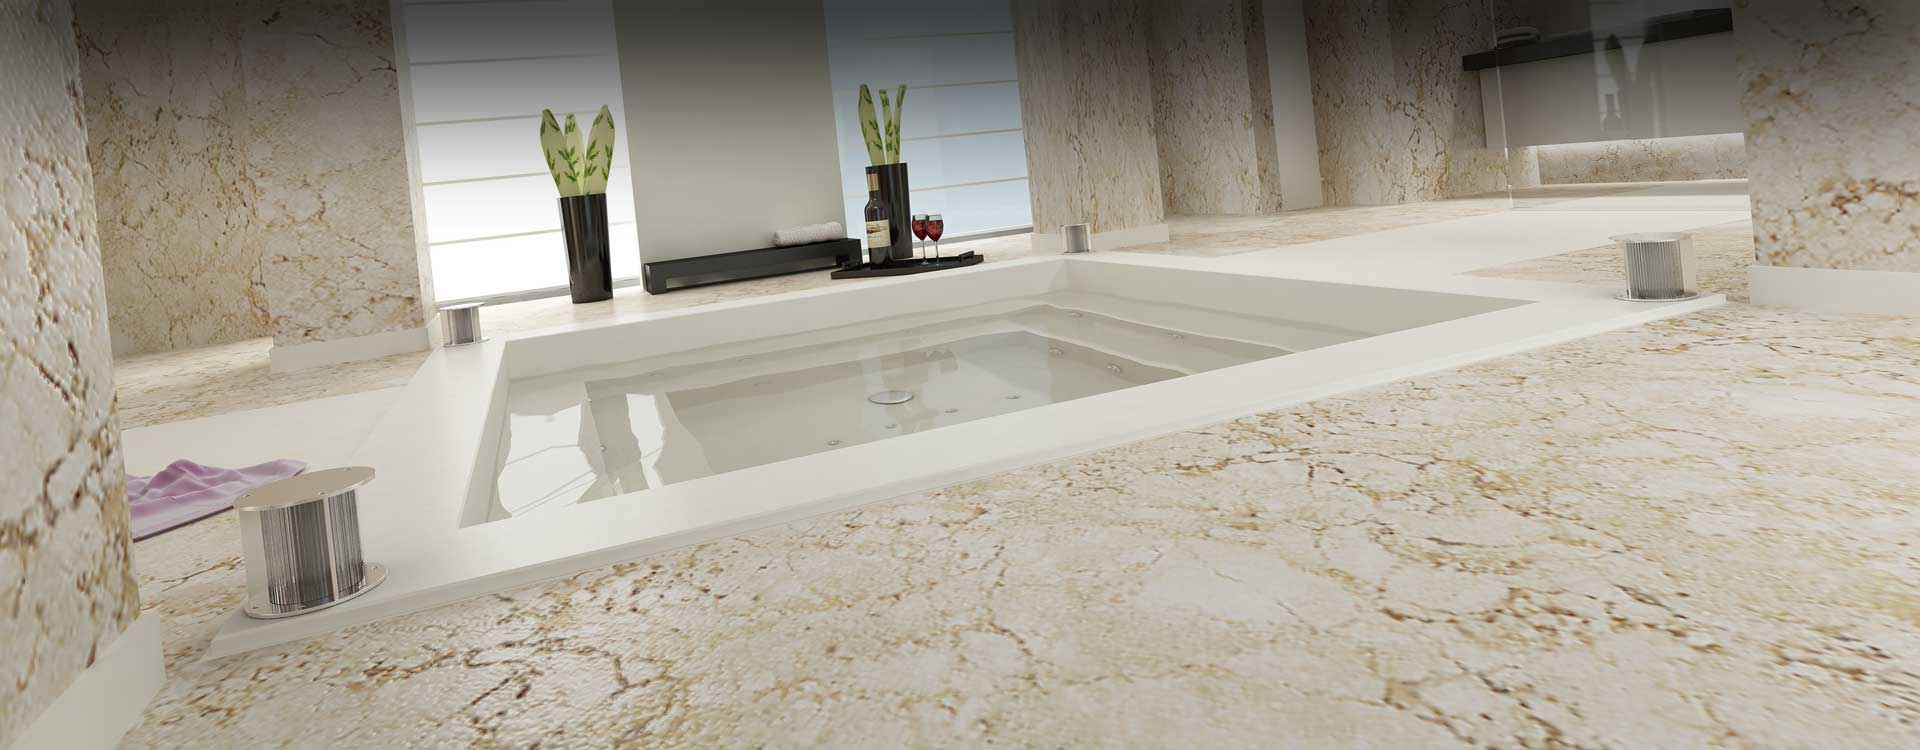 Marble Cleaner Sydney | Stone Cleaning Sydney